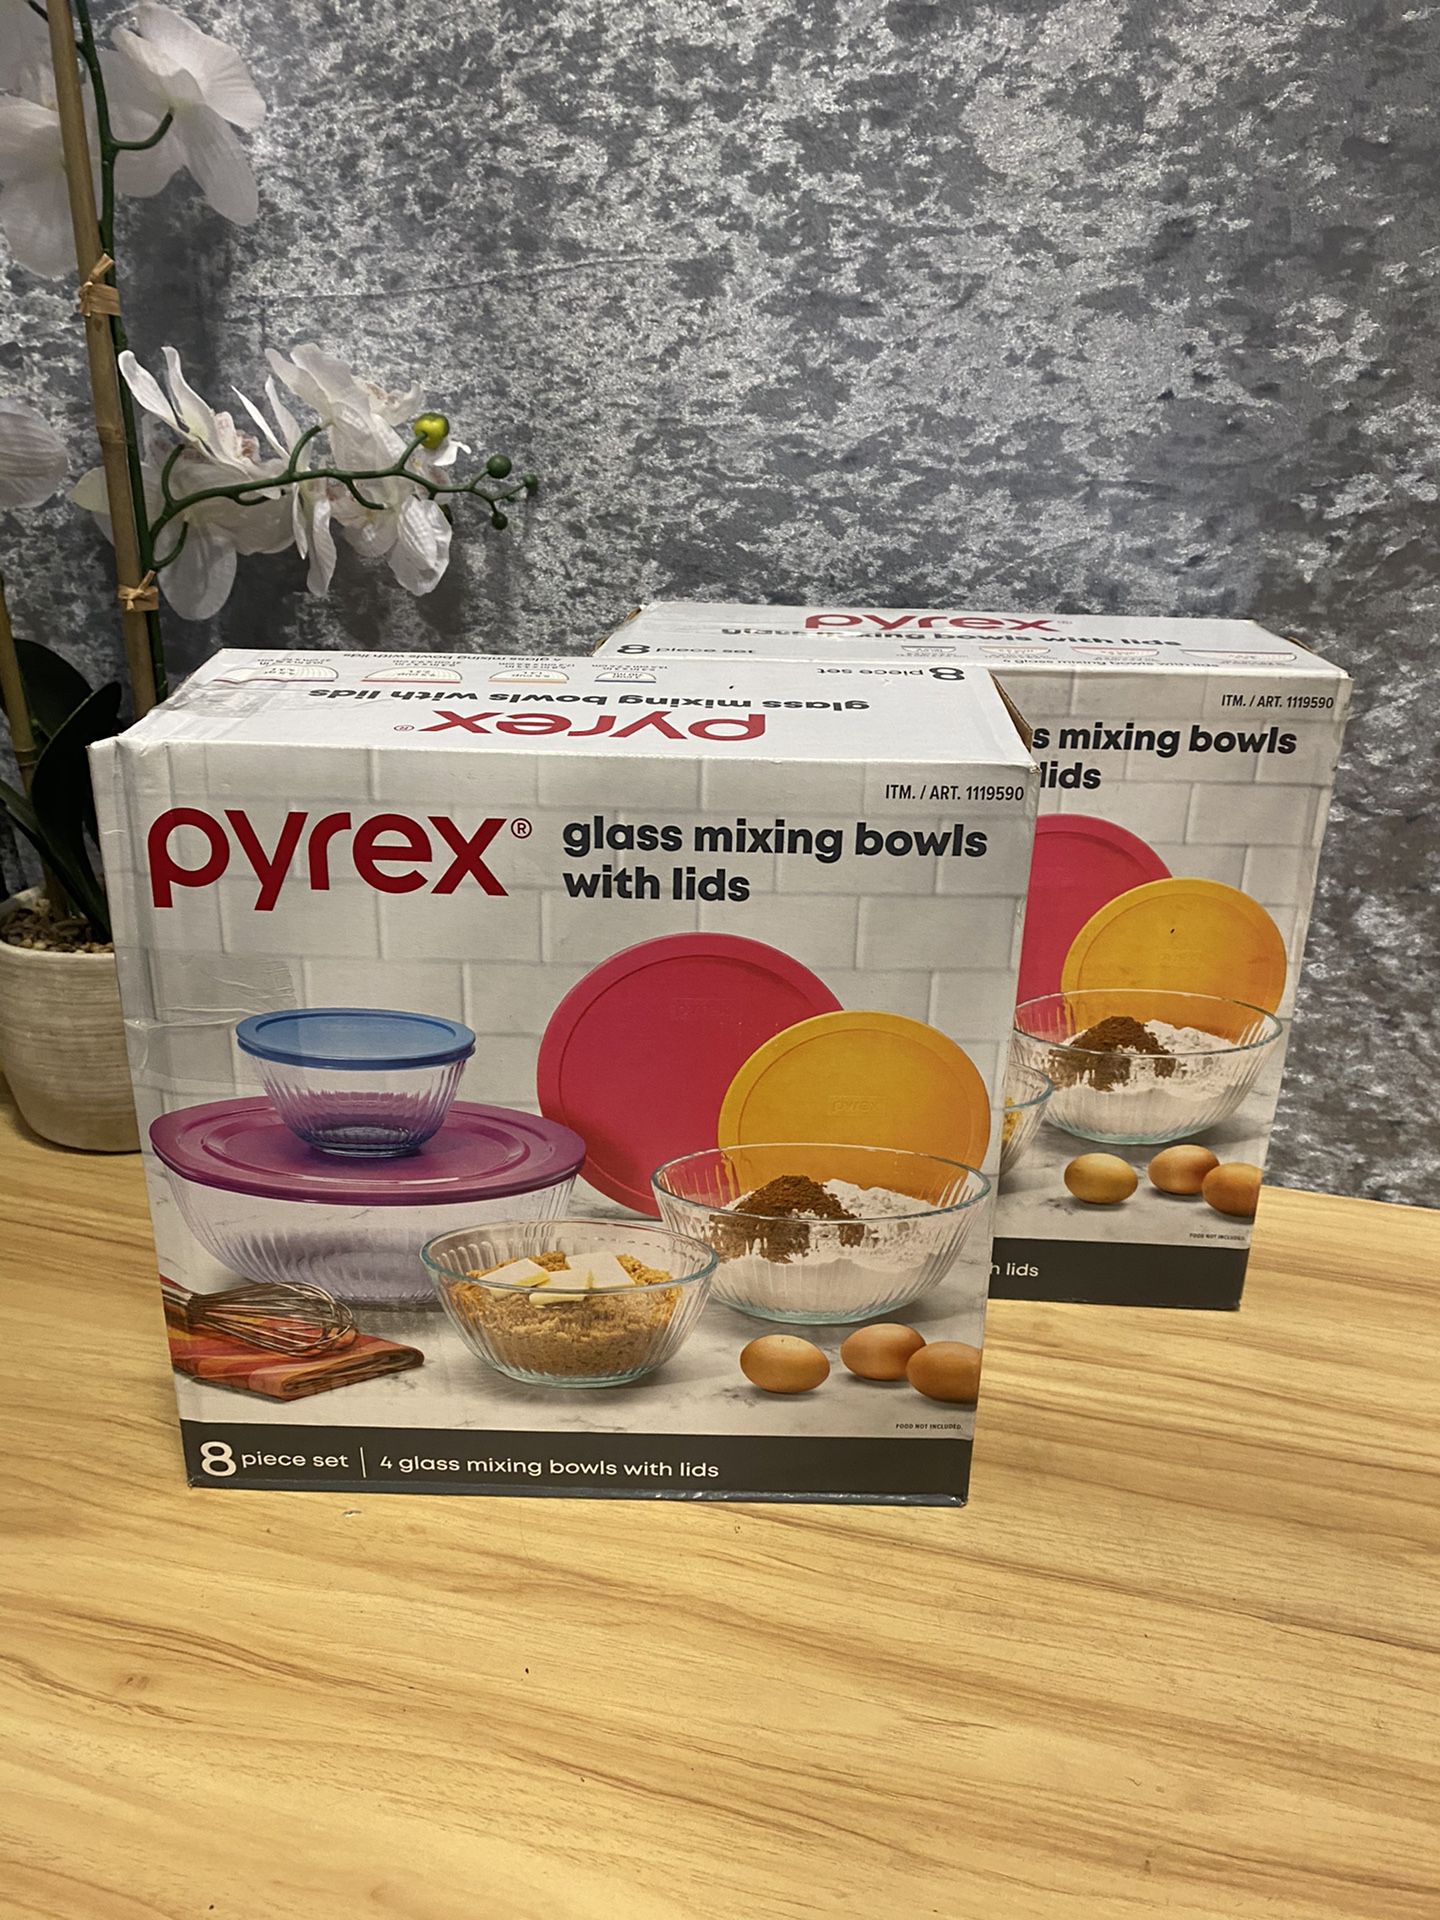 Pyrex - glass mixing bowls - new